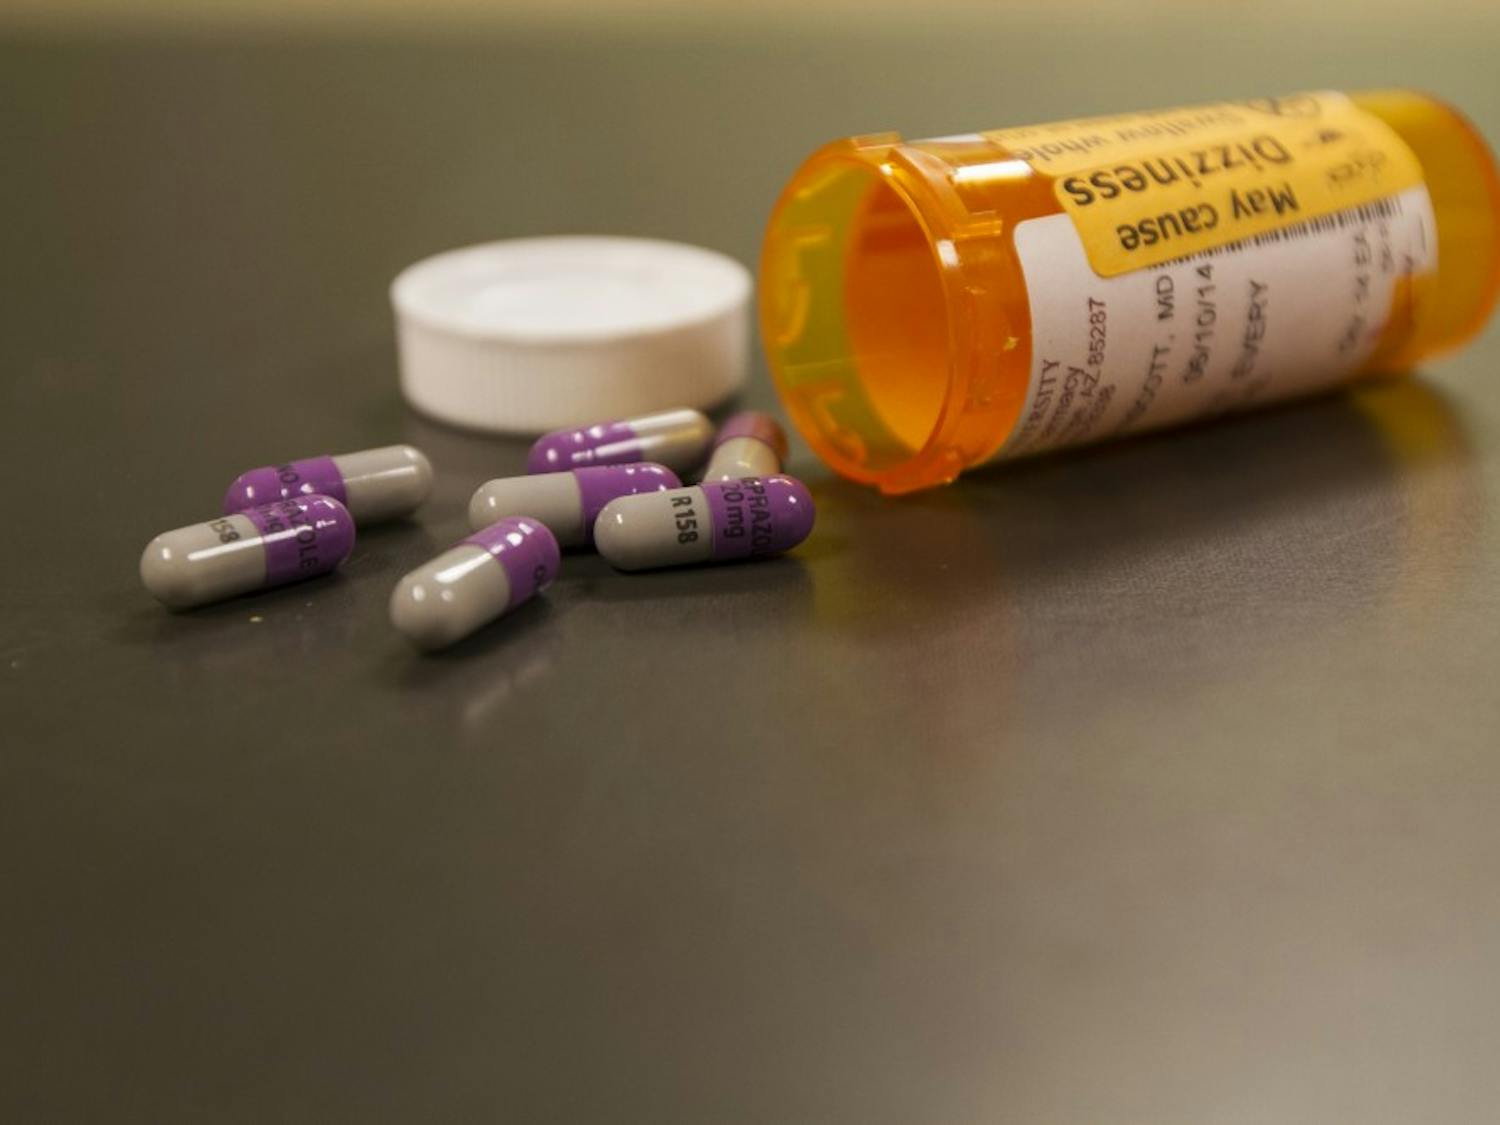 Arizona ranks sixth in the nation for prescription drug overdose deaths, according to a new report by the Center for Disease Control and Prevention. (Photo by Sean Logan)